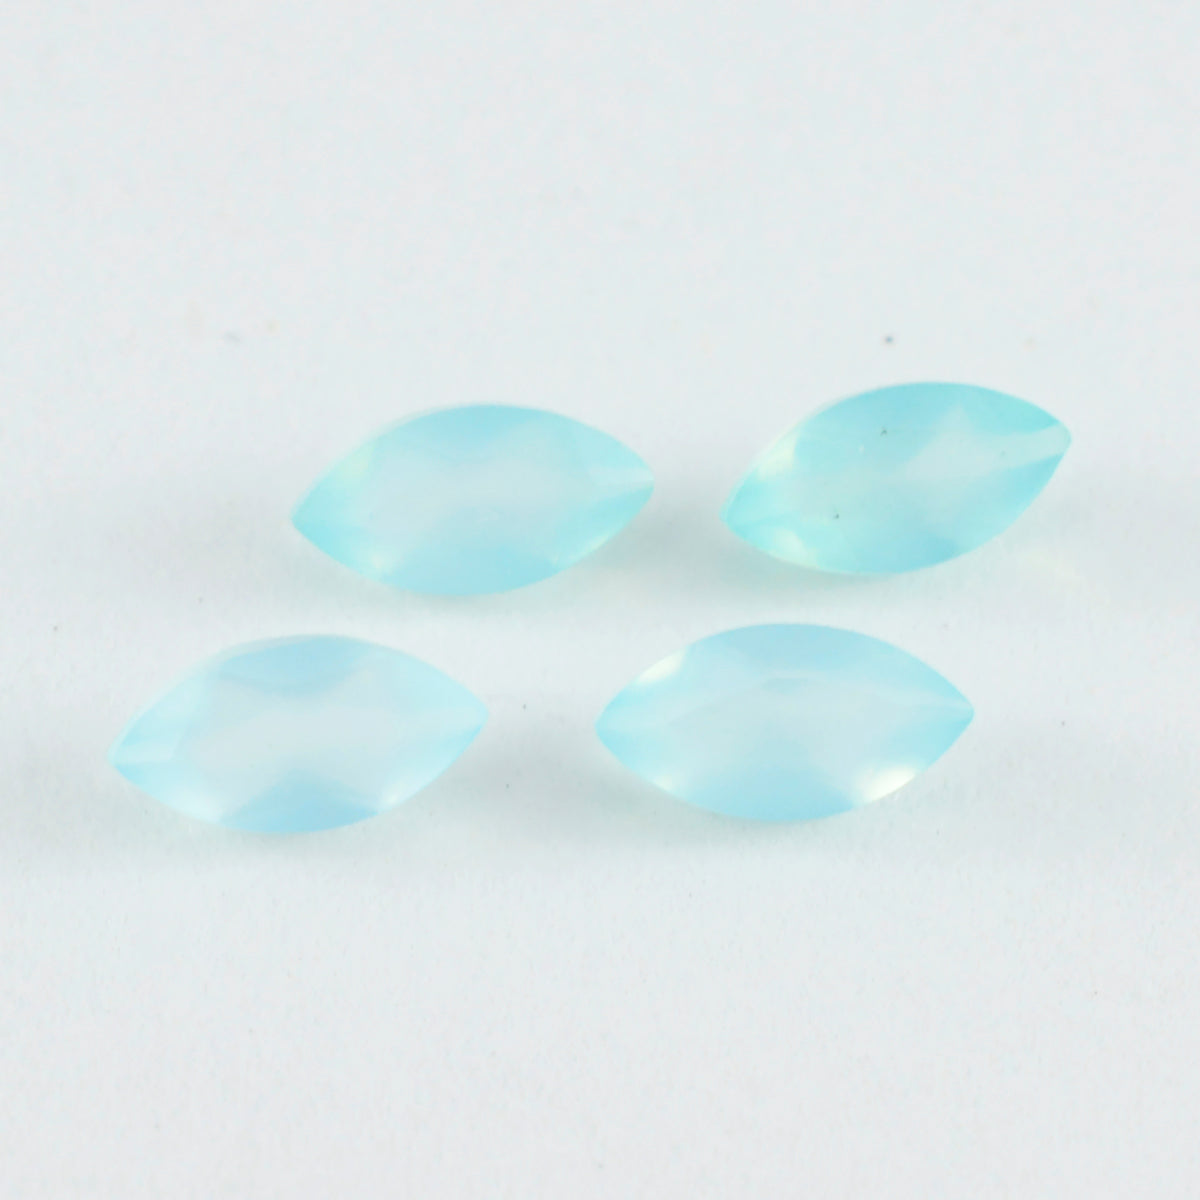 Riyogems 1PC Real Aqua Chalcedony Faceted 8x16 mm Marquise Shape A1 Quality Stone